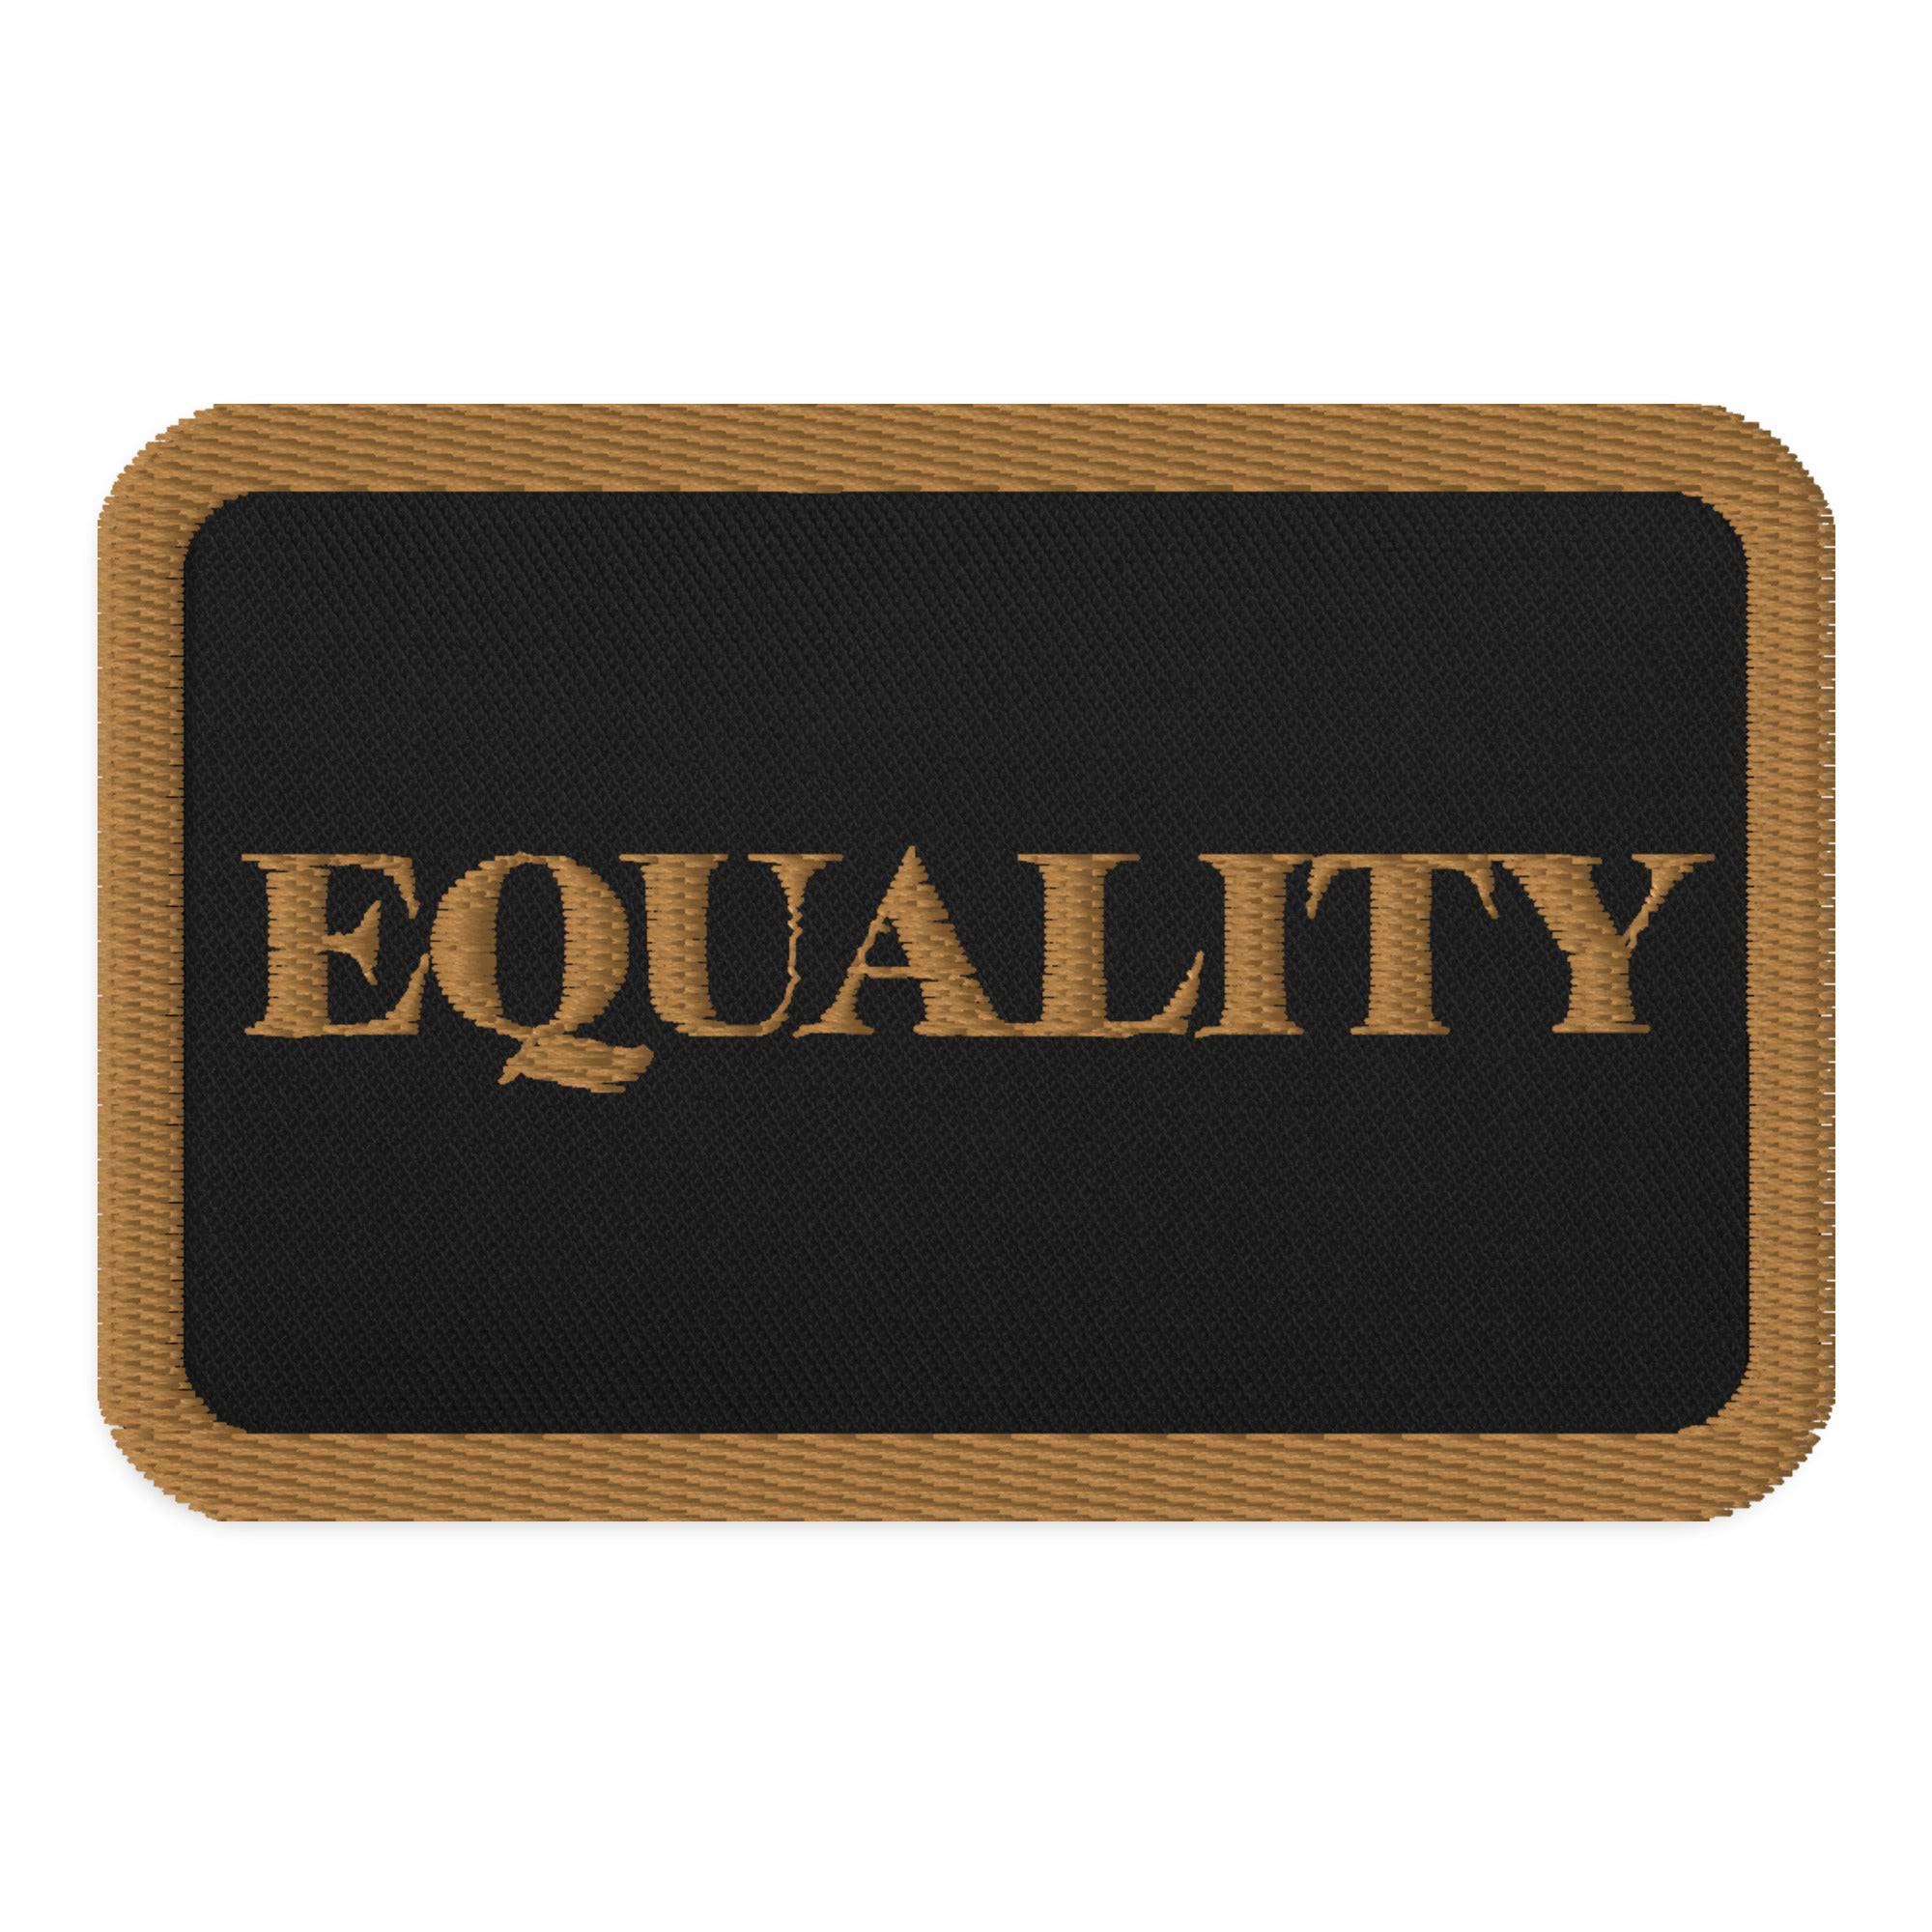 Equality Patch Embroidered patches